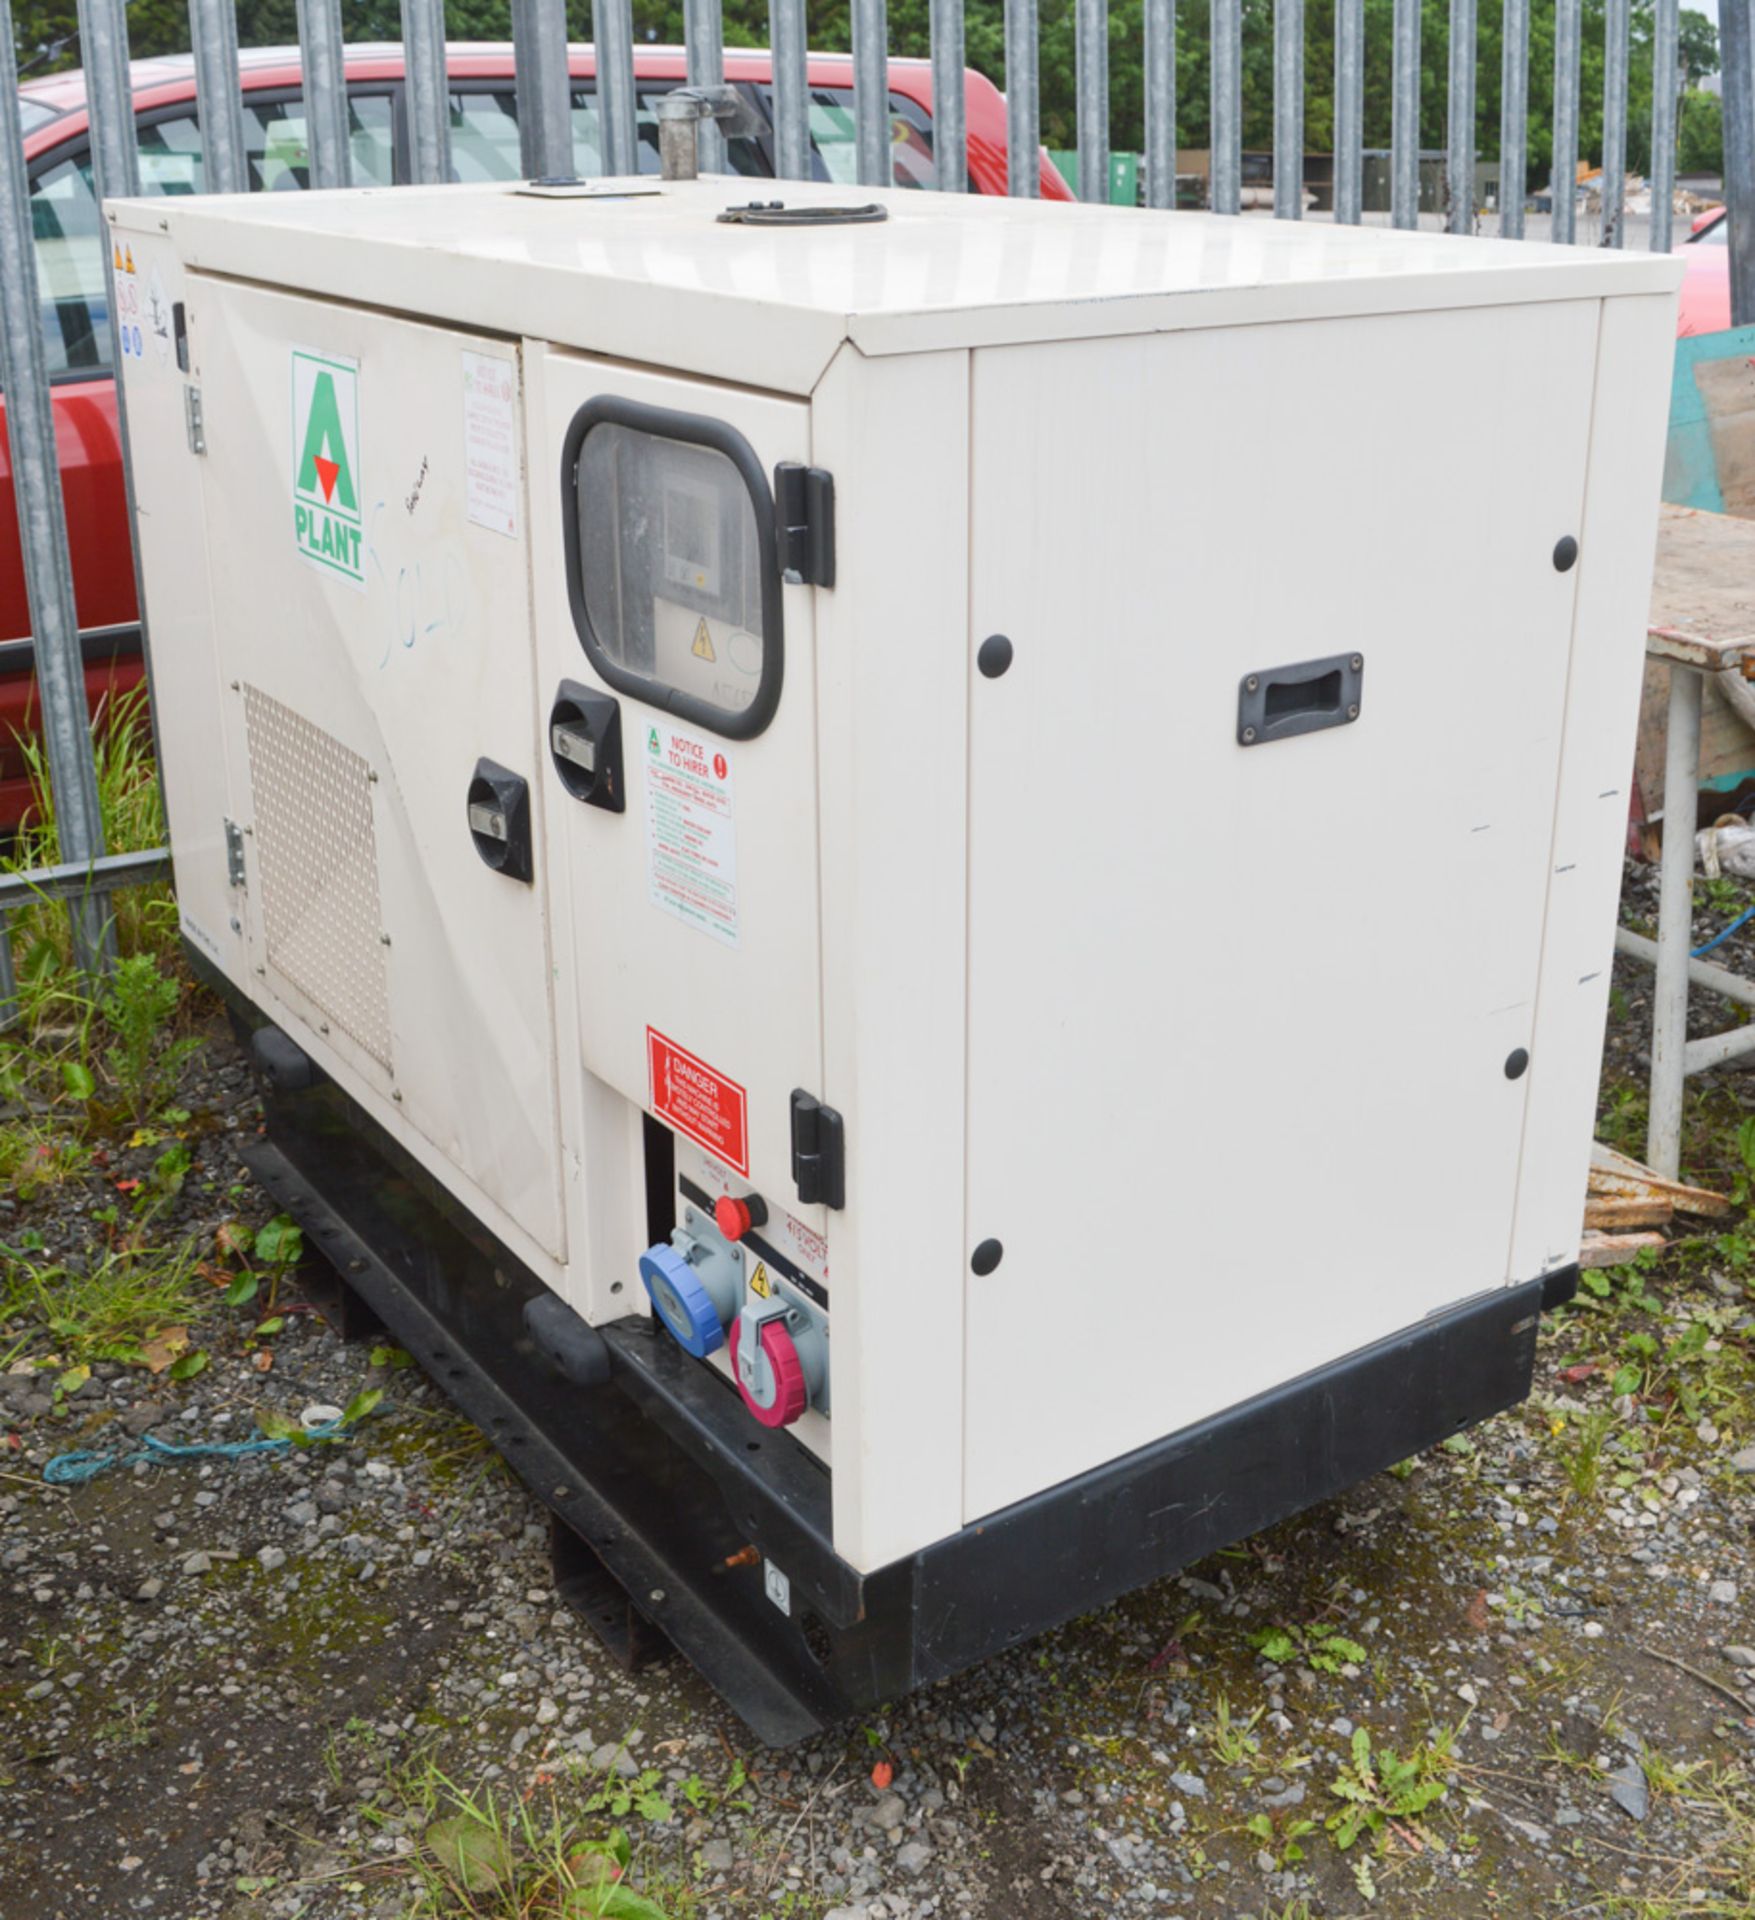 FG Wilson XD20P4 20 kva diesel driven generator Year: 2011 S/N: 09288 Recorded Hours: 4659 A565901